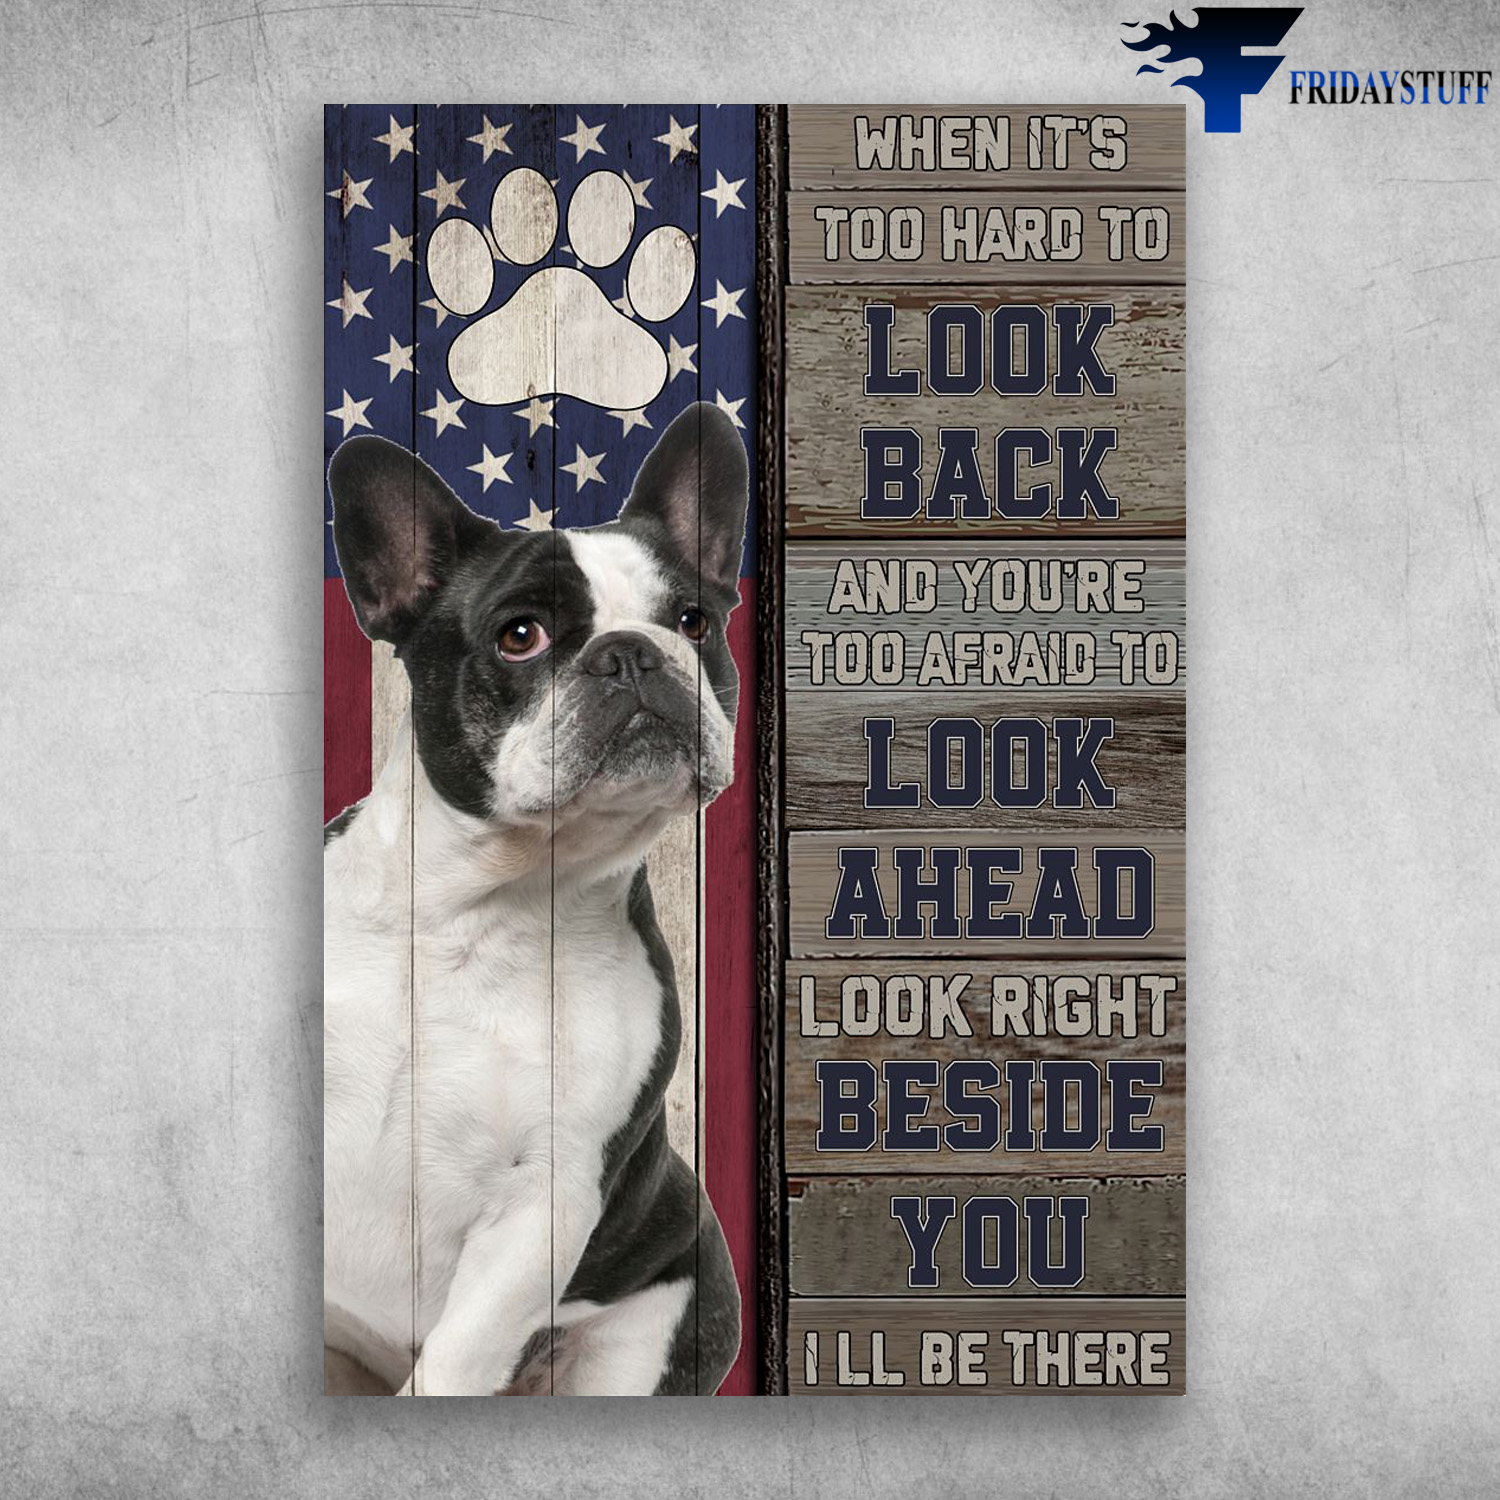 Freanch Bulldog American - When It's Too Hard To Look Back And You're Too Afraid To Look Ahead Look Right Beside You, I'll Be There